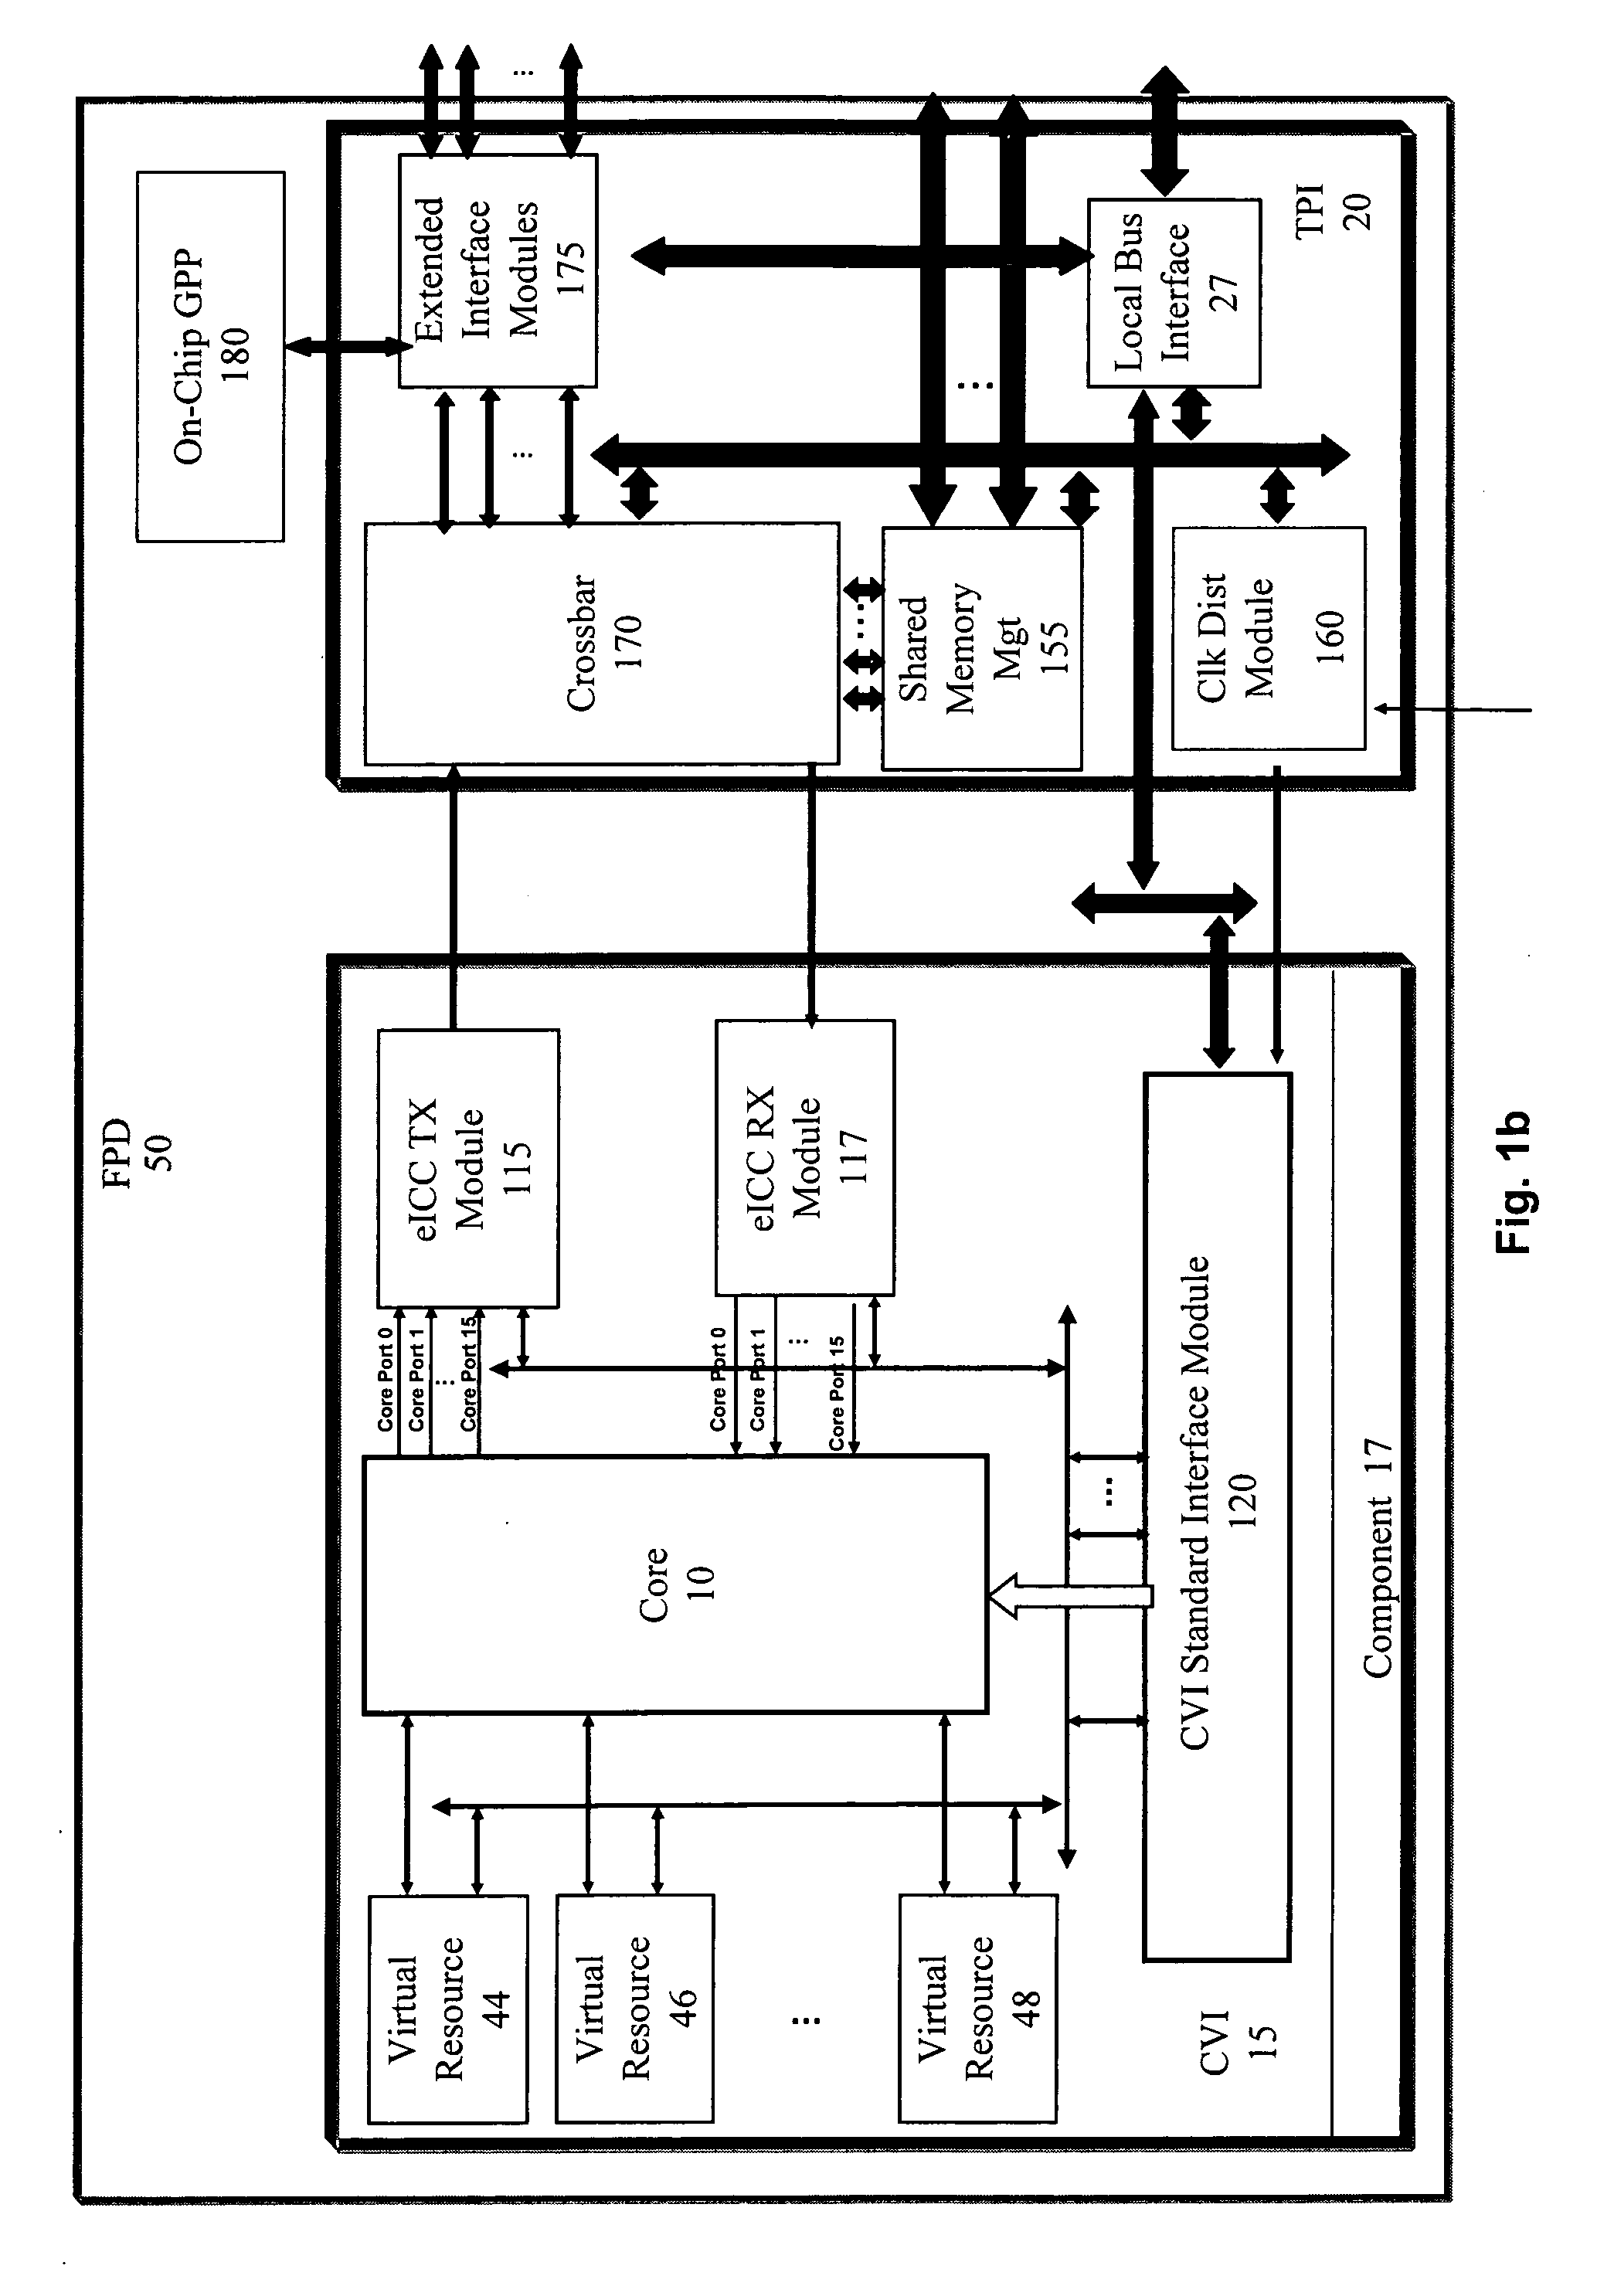 Common interface framework for developing field programmable device based applications independent of a target circuit board